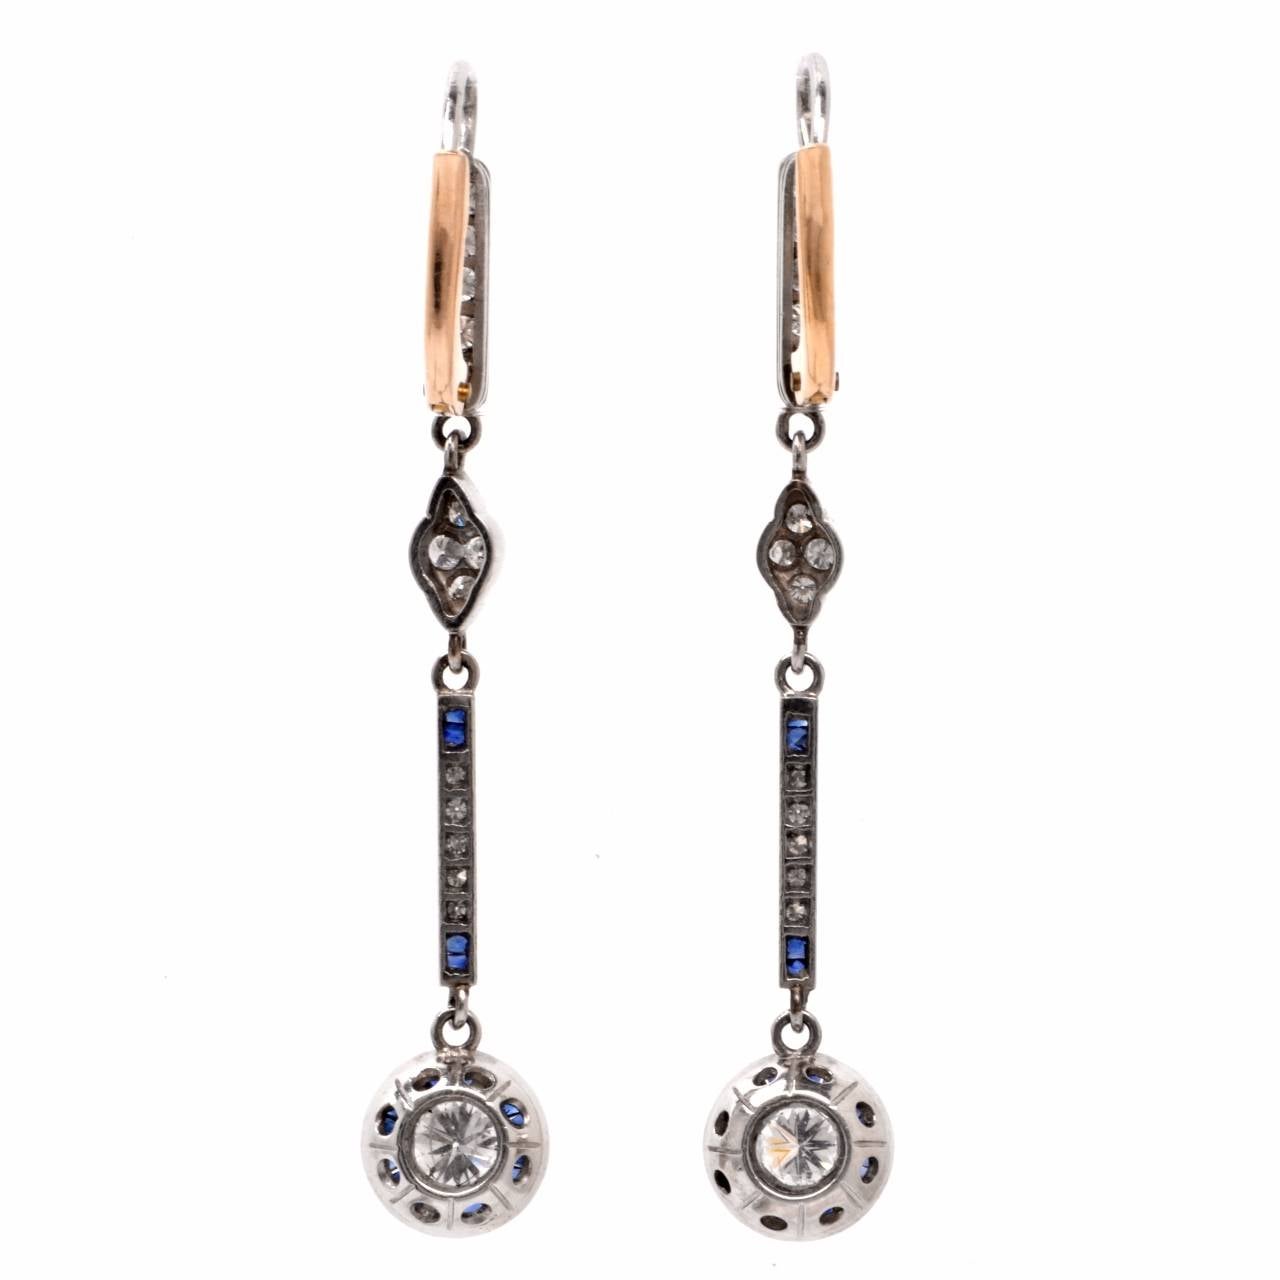 These vintage Art Deco pendant earrings  of  classic elegance are crafted in platinum with a touch of 18 yellow gold applied to French lever-backs. They weigh 6.3 grams and measure 2